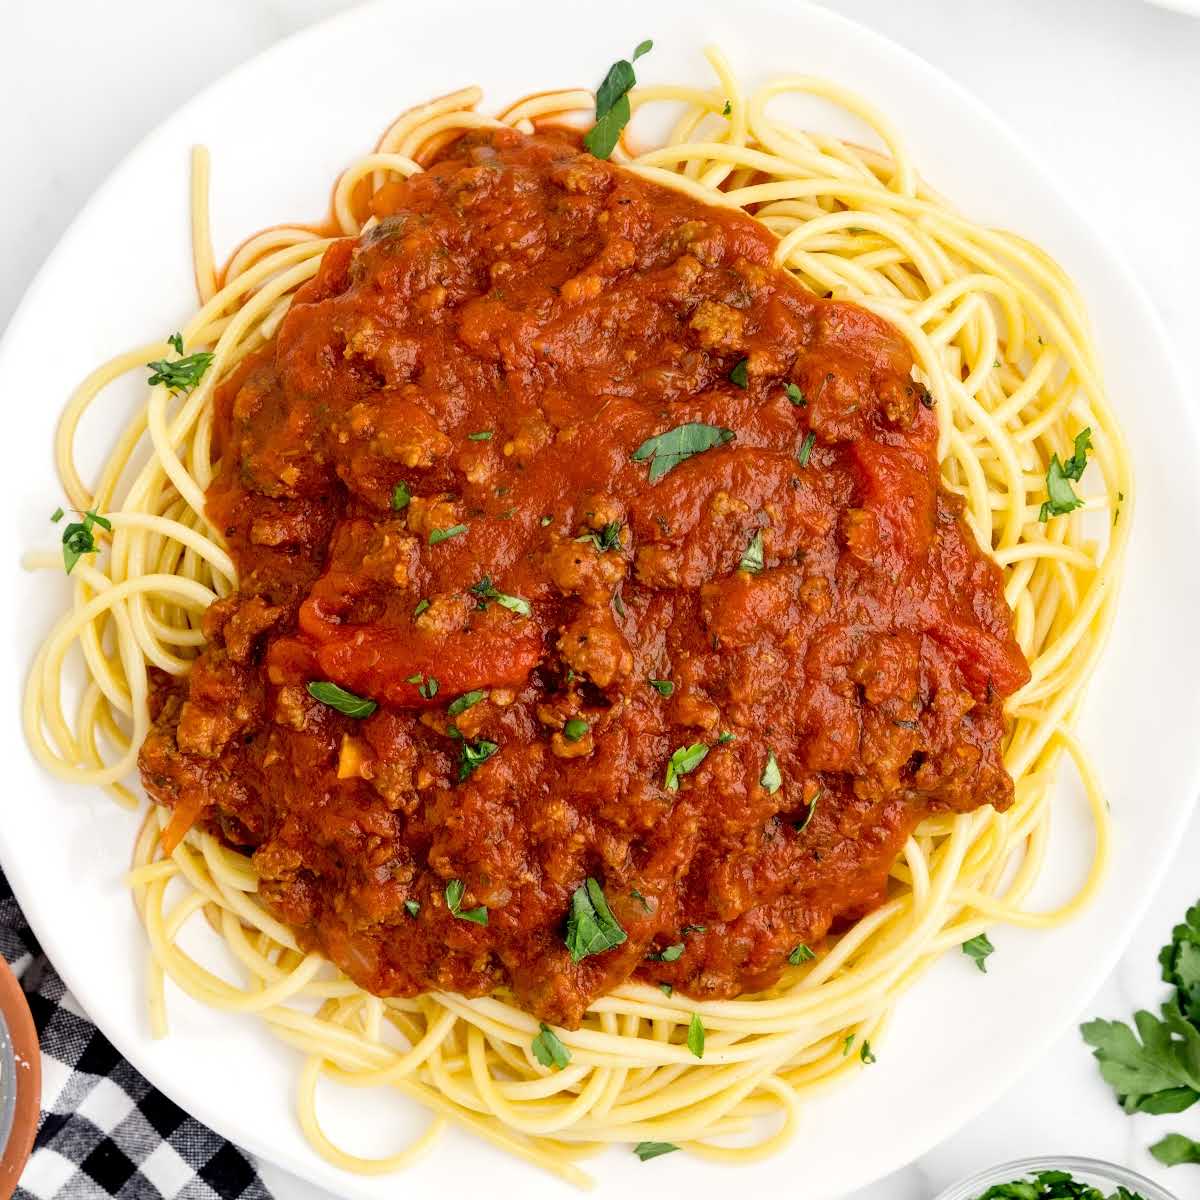 Spaghetti With Meat Sauce - Spaceships and Laser Beams